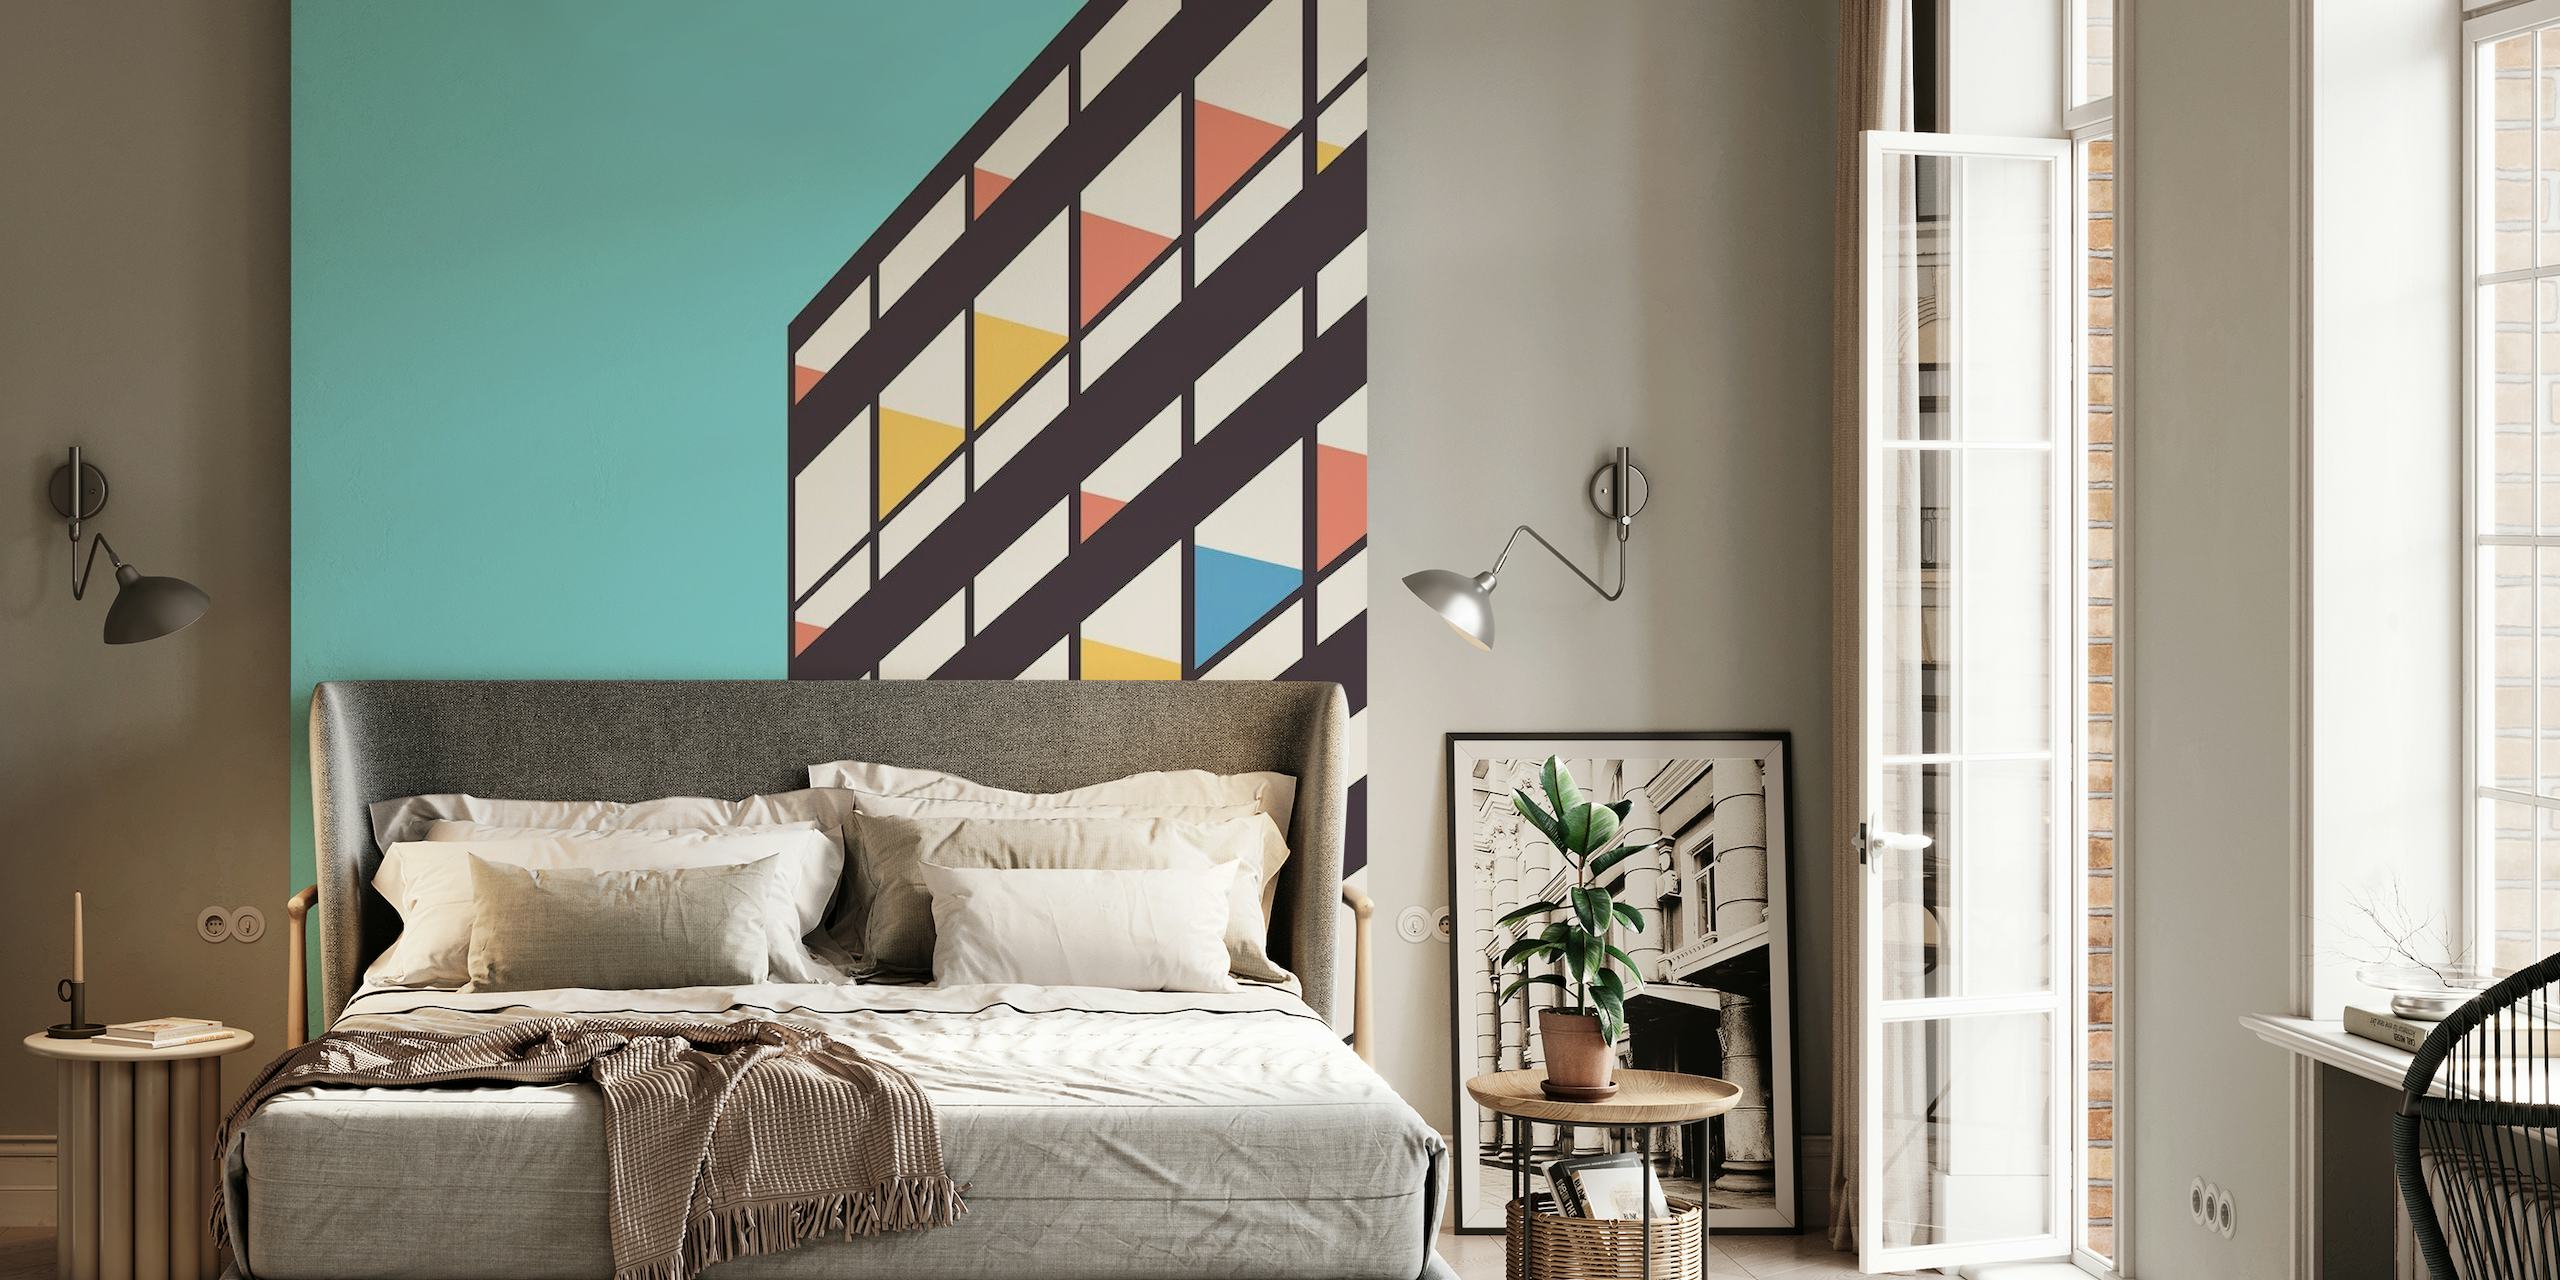 Abstract architectural wall mural with colorful facade pattern